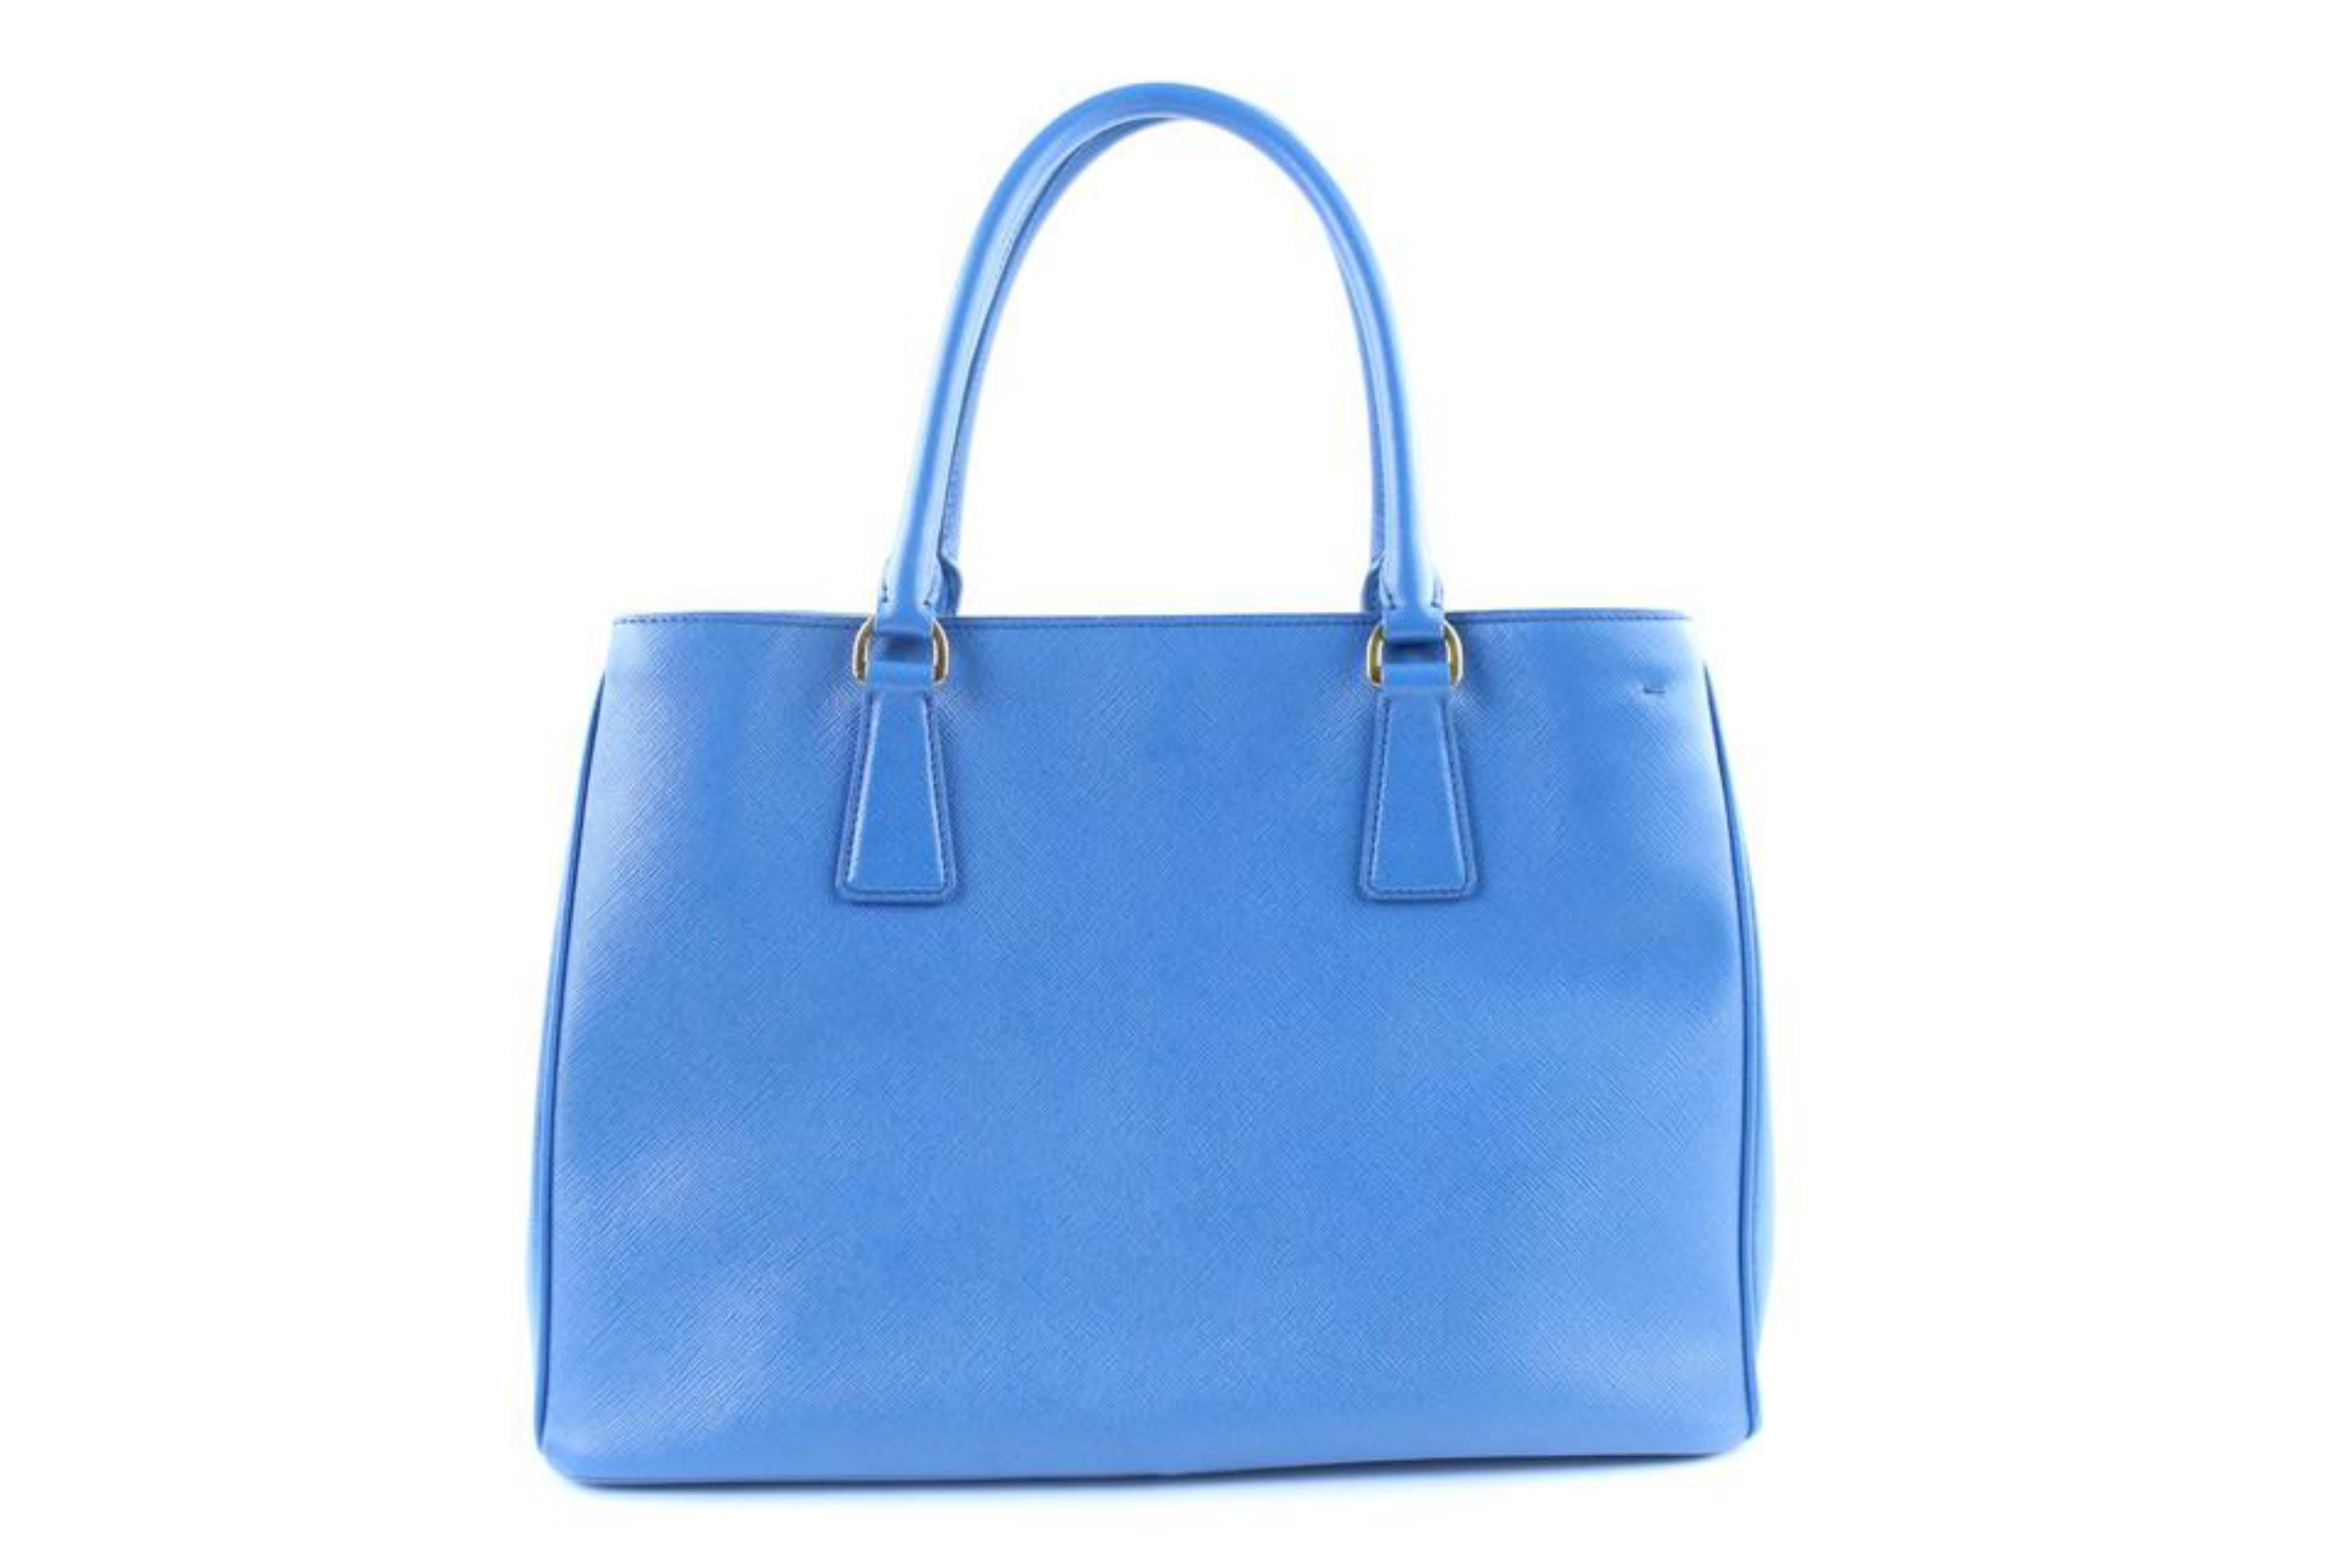 Prada Lux Saffiano 2way 2pr1205 Blue Patent Leather Tote In Excellent Condition For Sale In Forest Hills, NY